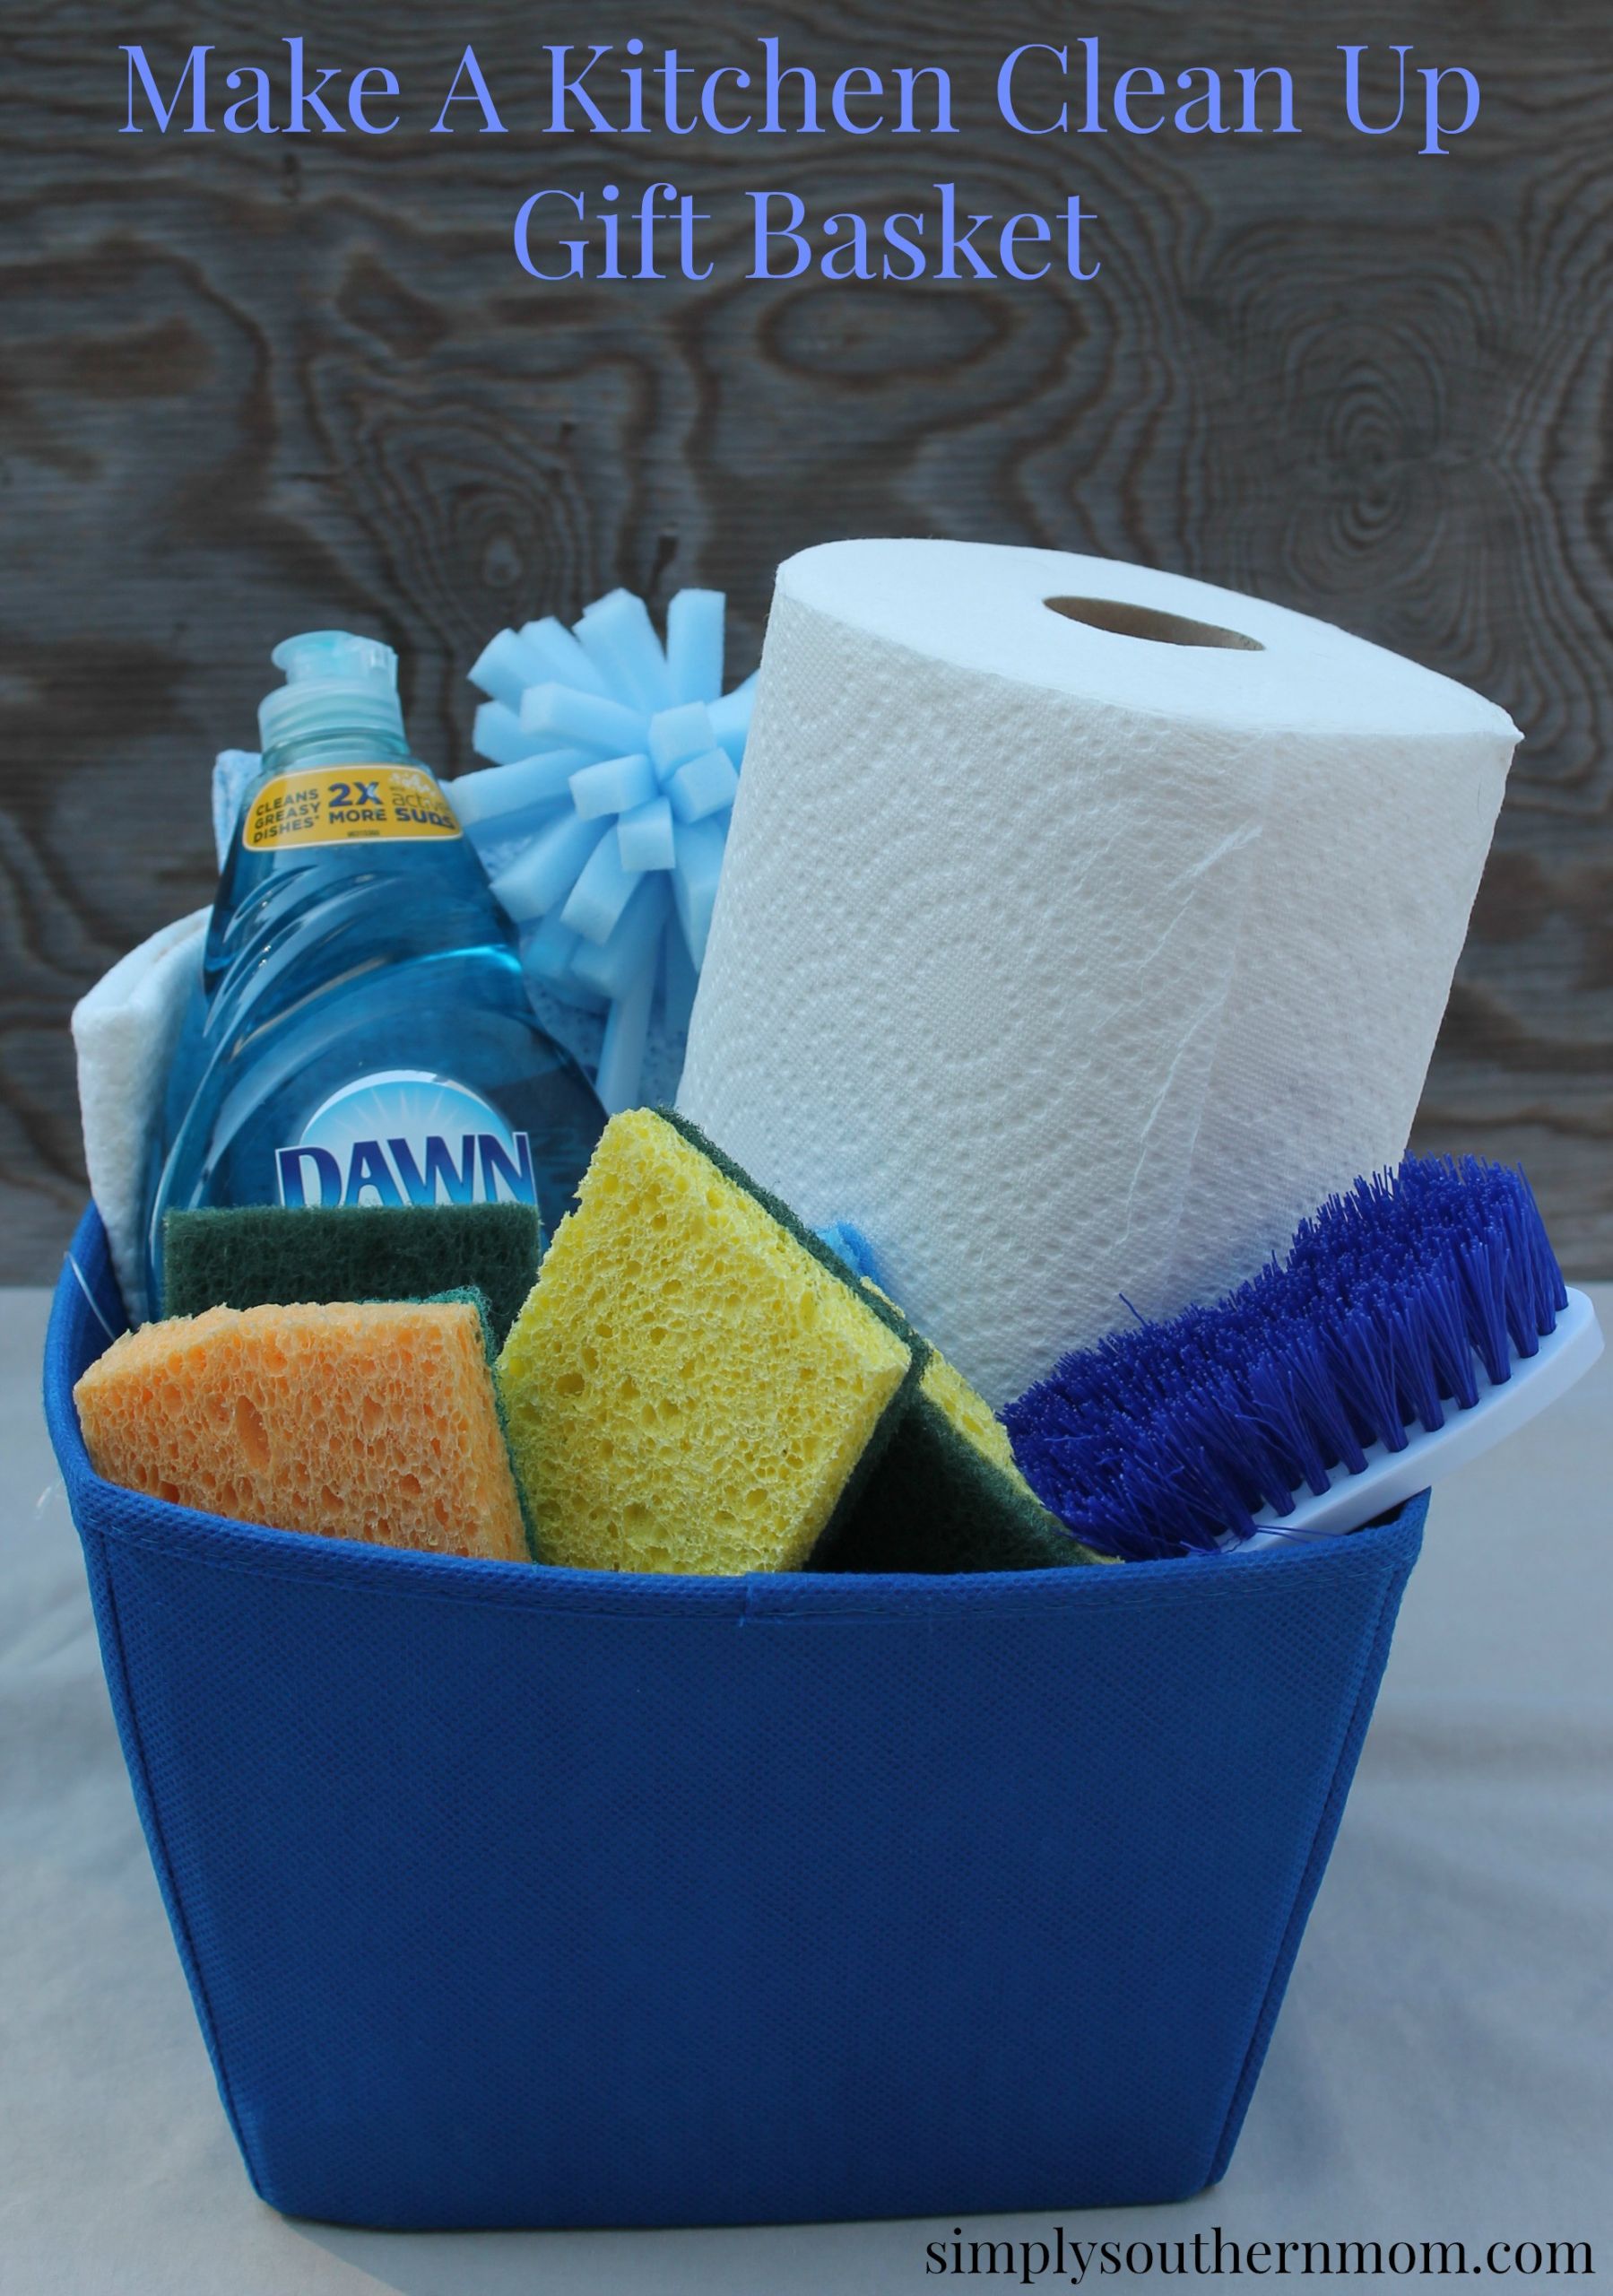 Kitchen Gift Basket Ideas
 Make a Kitchen Cleaning Gift Basket Simply Southern Mom